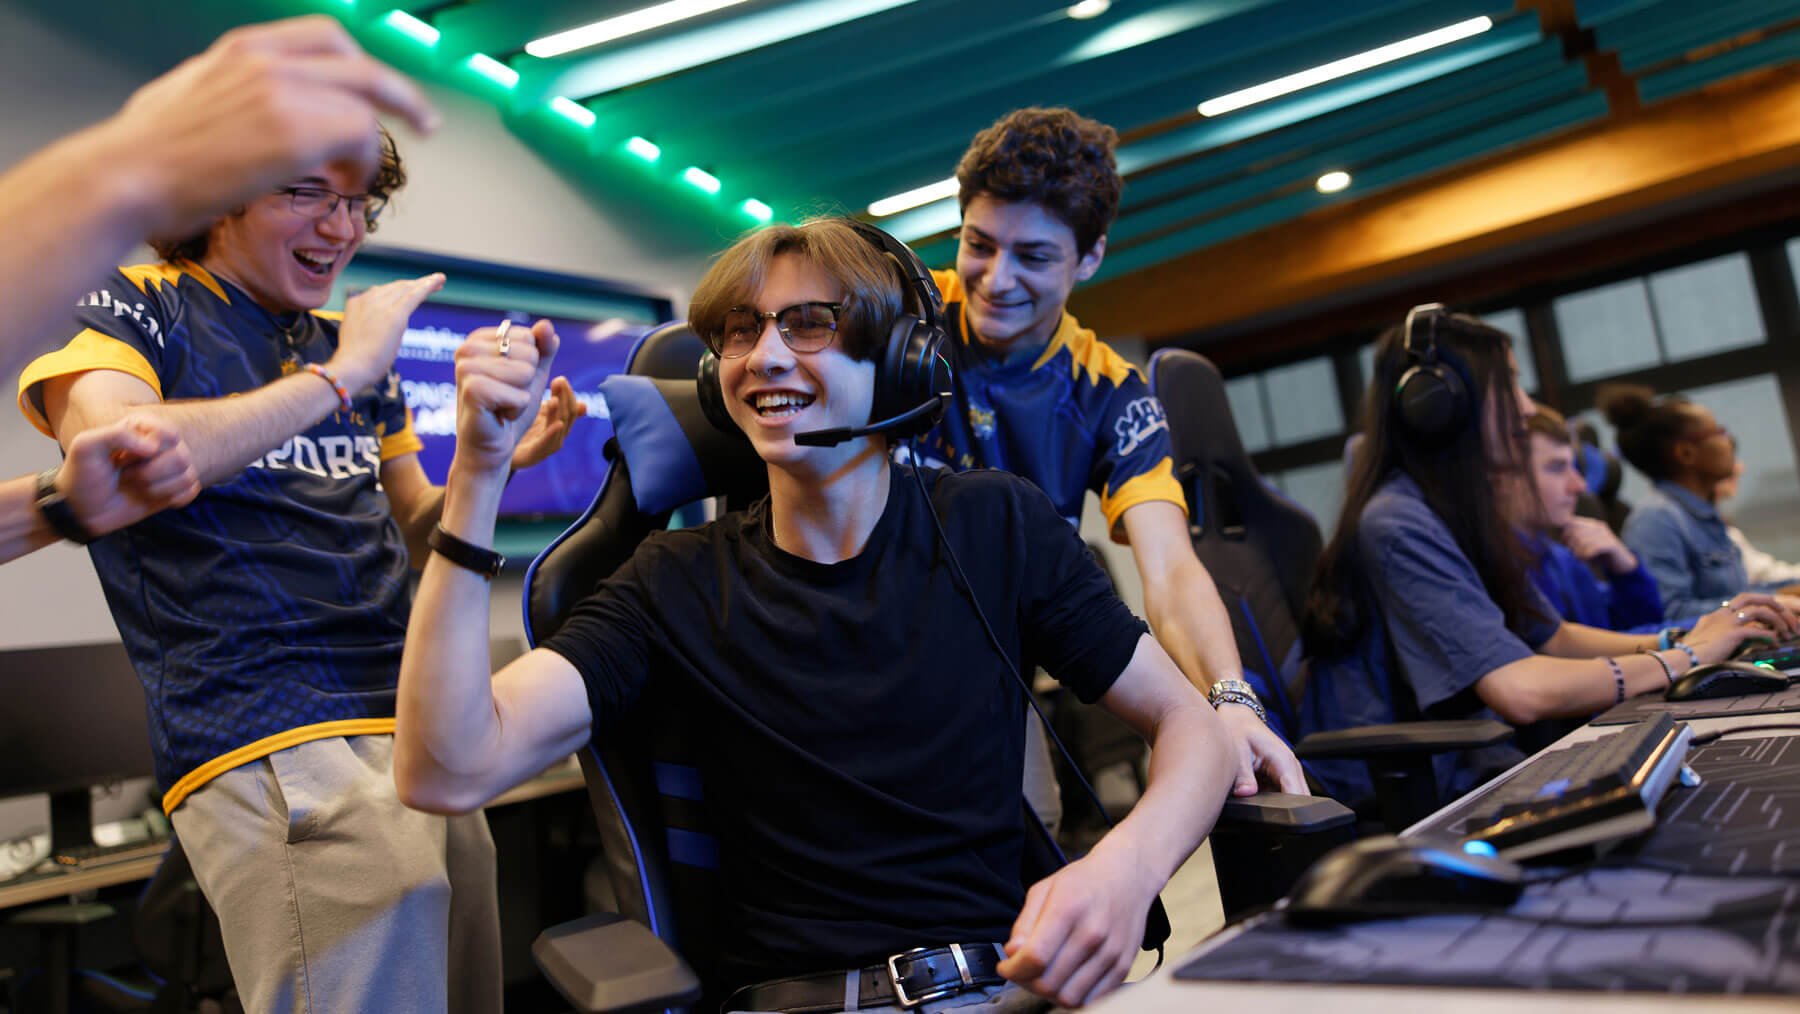 Quinnipiac students celebrate after winning a game in the eSports lab.